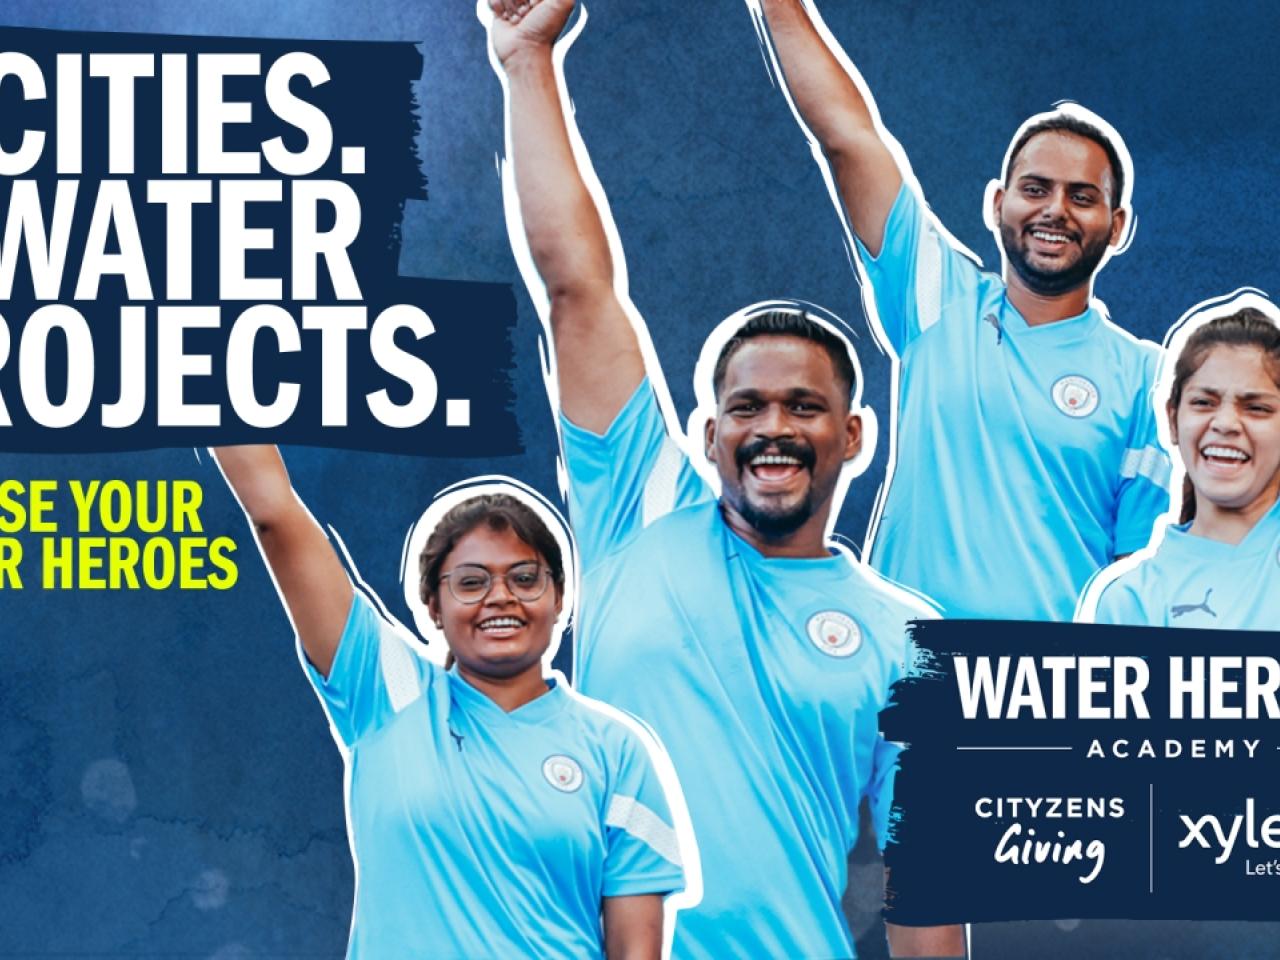 Banner reading, "5 Cities. 5 Water Projects. Choose your water heroes"